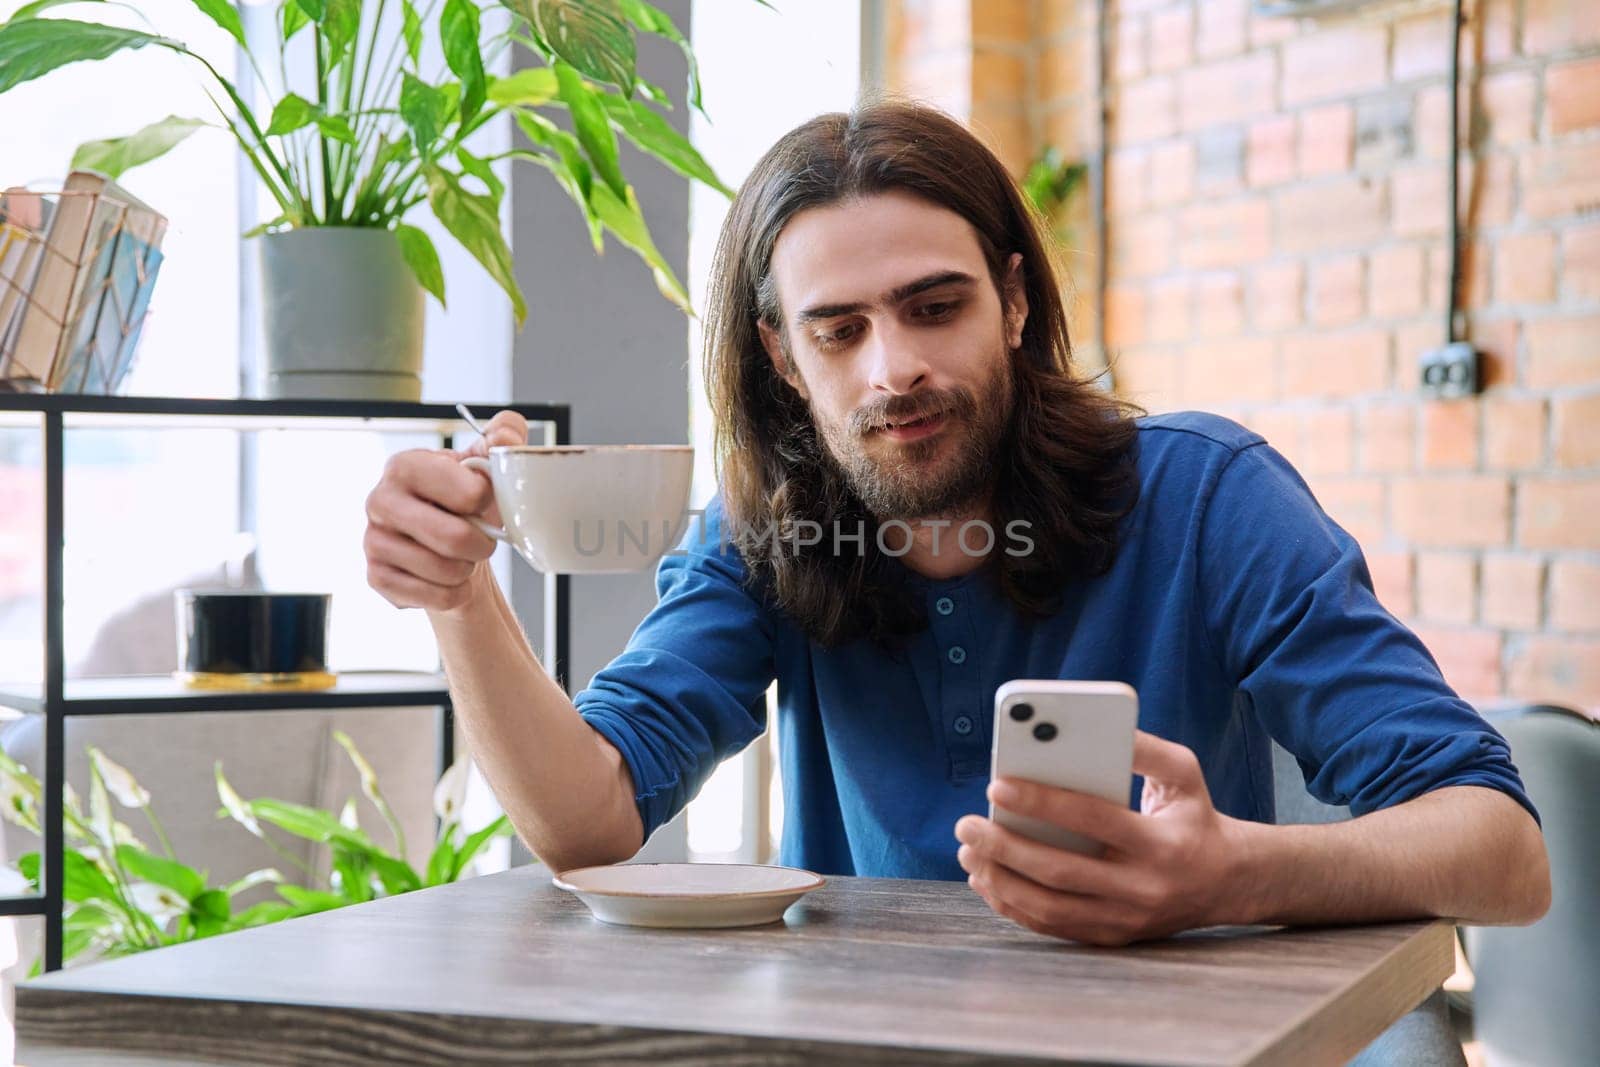 Young 30s stylish handsome bearded with long hair man using smartphone, drinking cup of coffee, sitting in cafe. Mobile technologies Internet apps applications for leisure work business communication